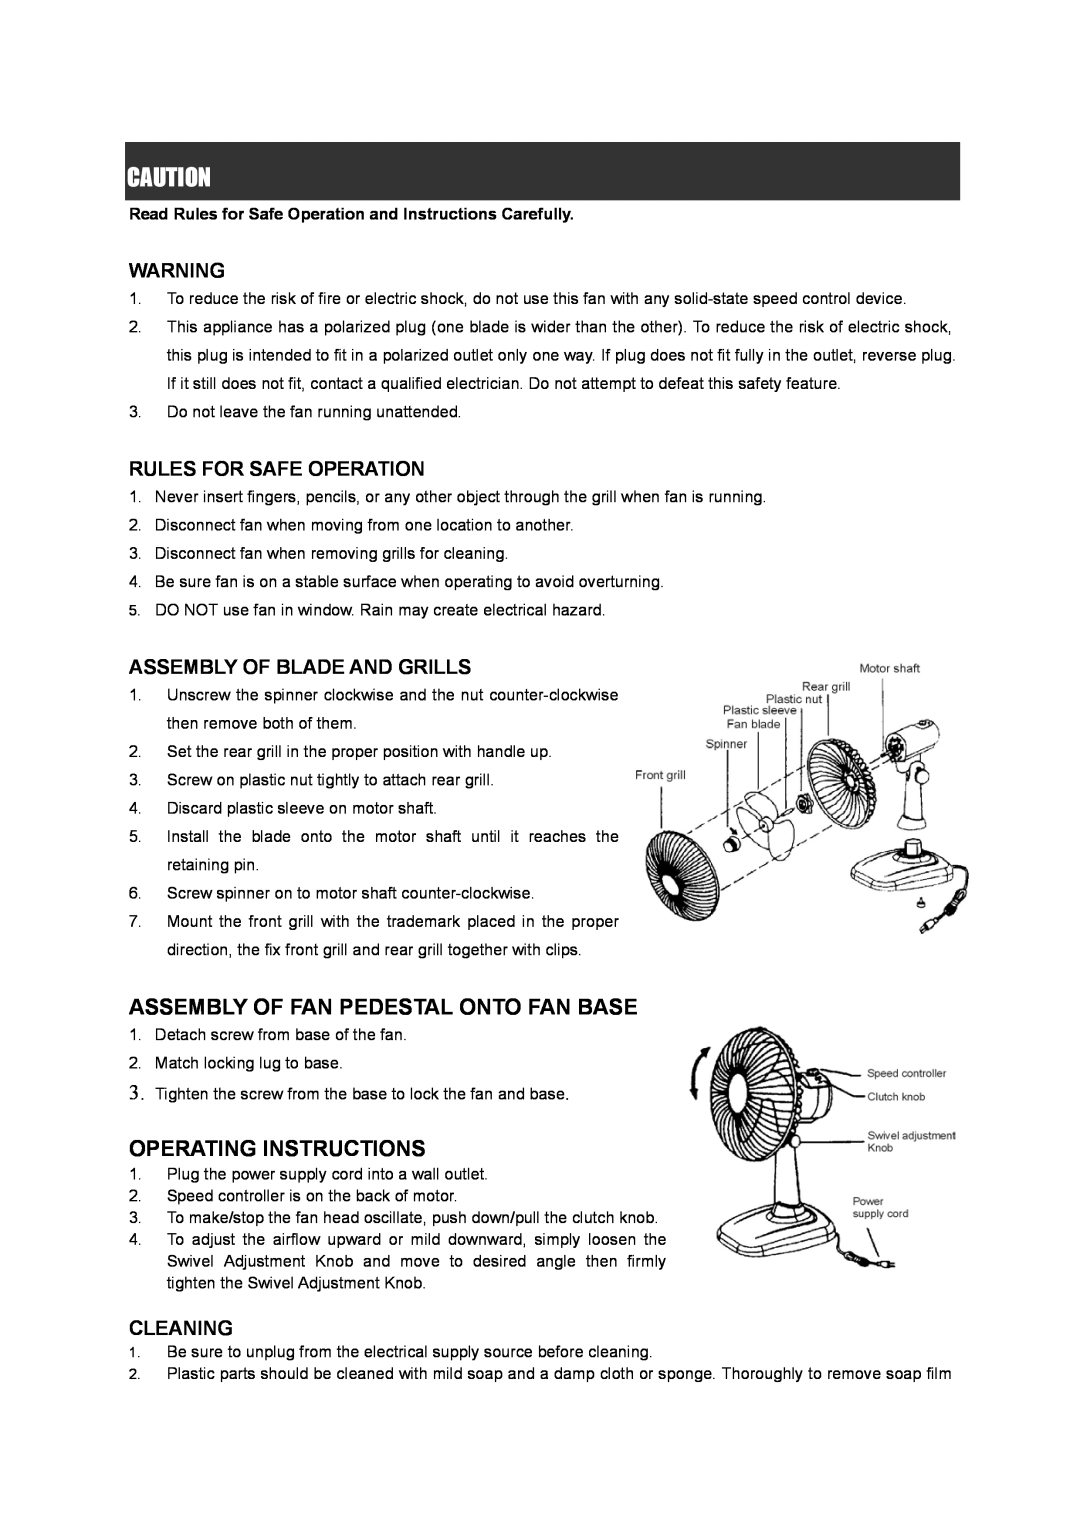 Pelonis FT30-A4 Assembly Of Fan Pedestal Onto Fan Base, Operating Instructions, Rules For Safe Operation, Cleaning 